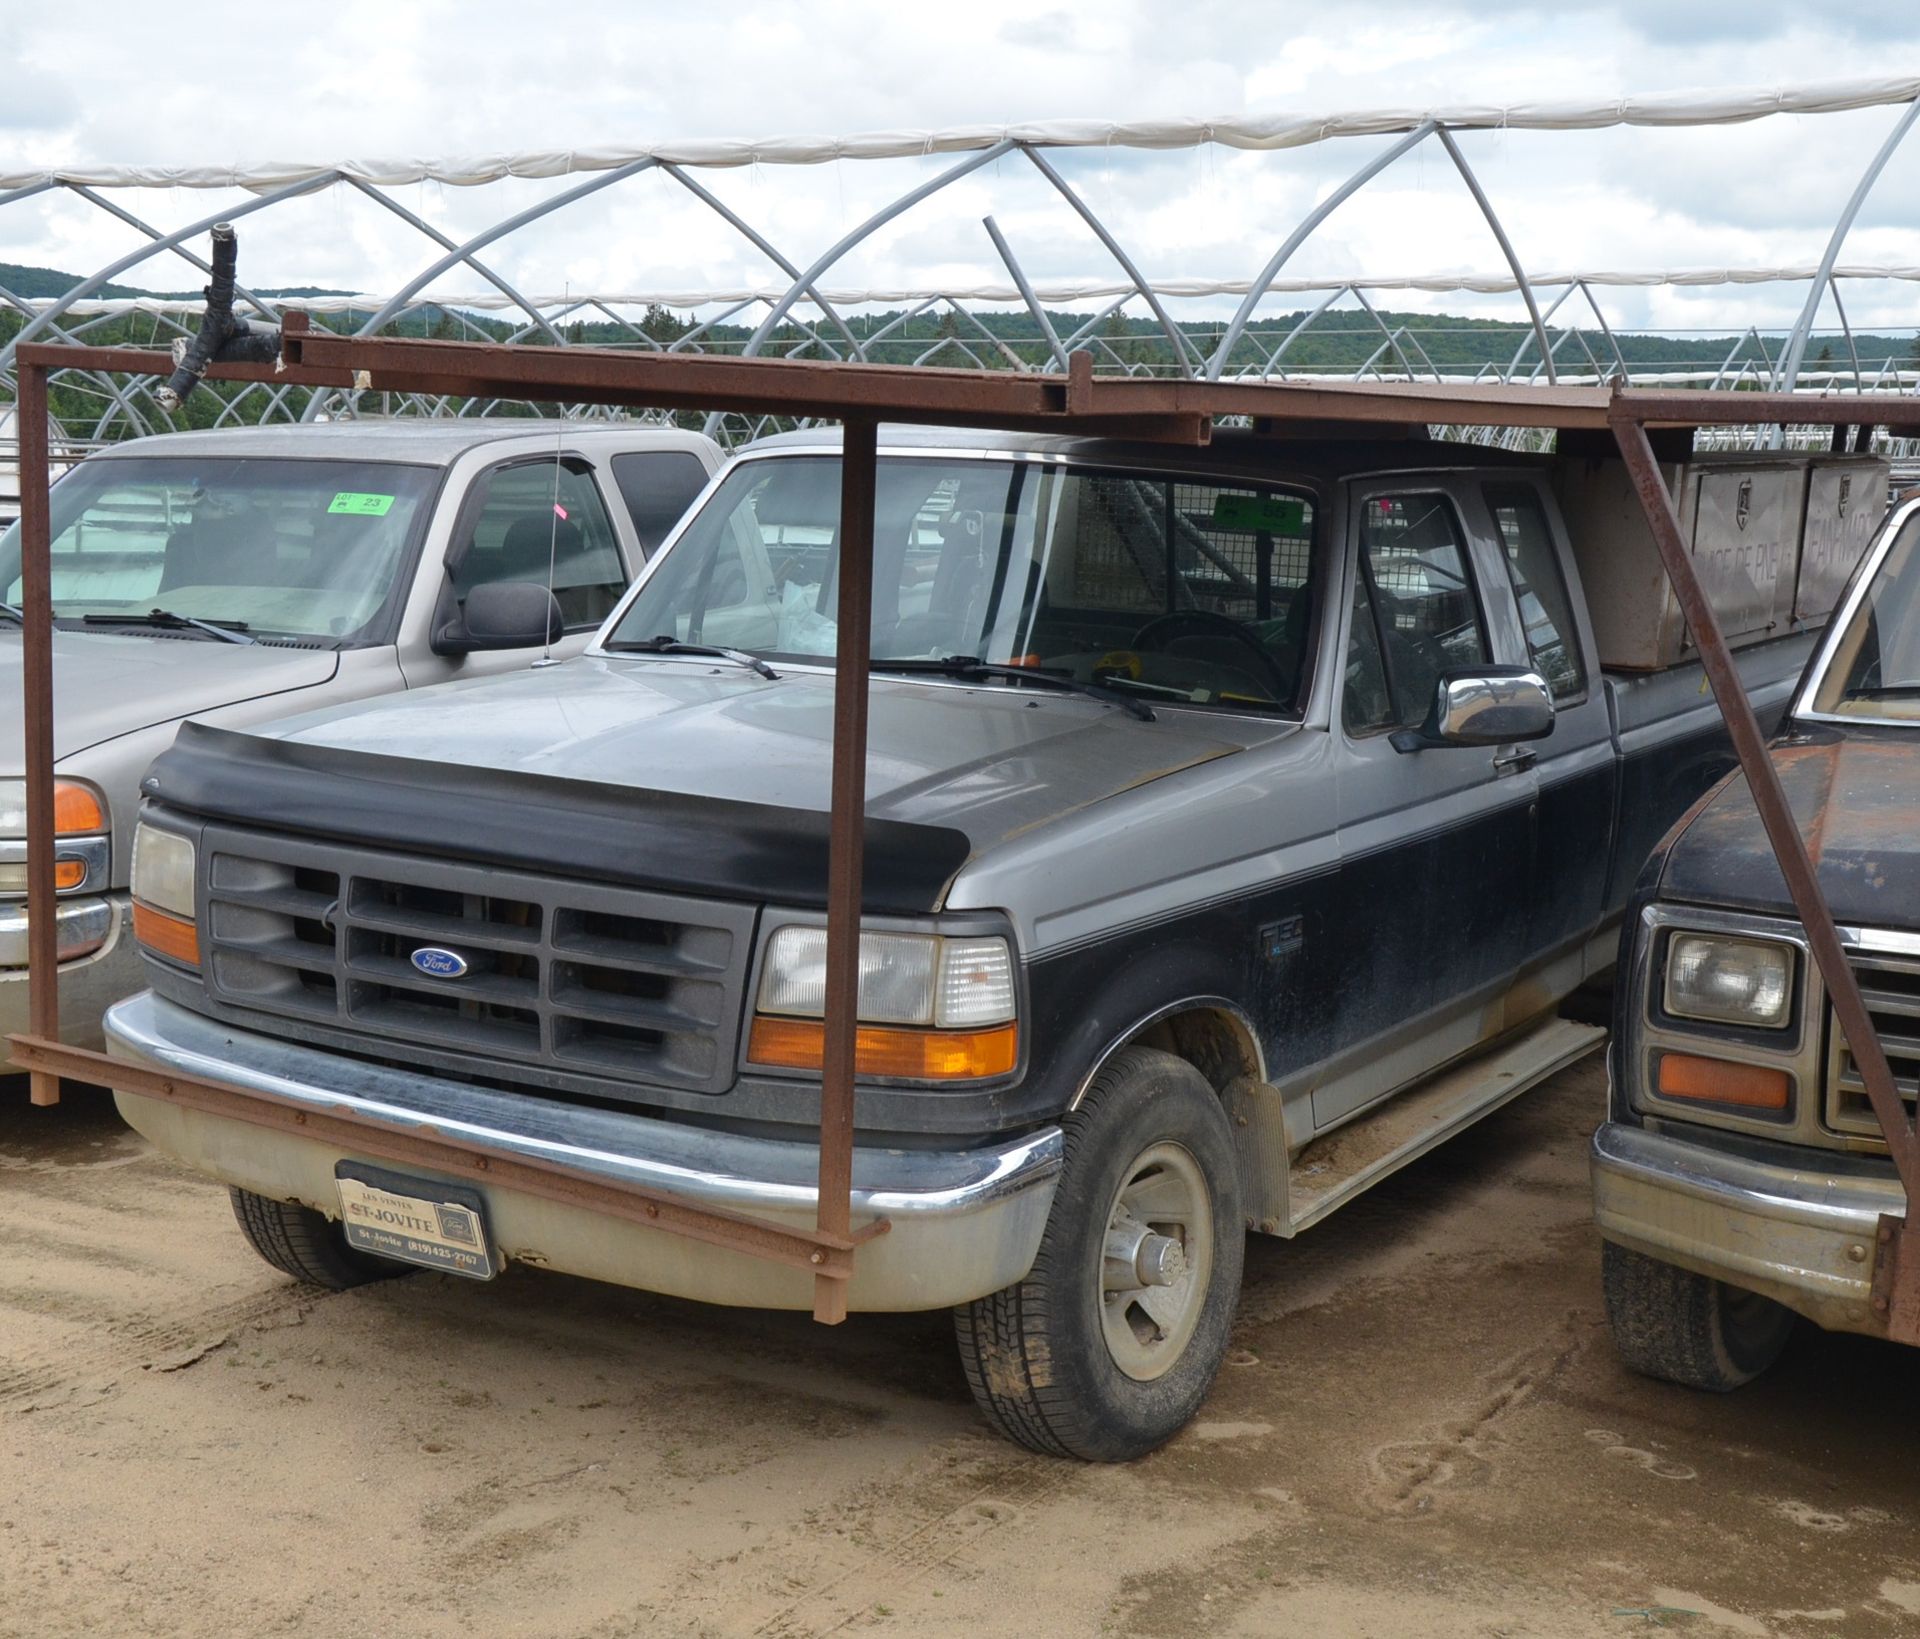 FORD (1993) F150XL PICKUP TRUCK WITH ROOFTOP WORK PLATFORM, S/N VIN 1FTEX14N8PKB08863 (OFF ROAD ONLY